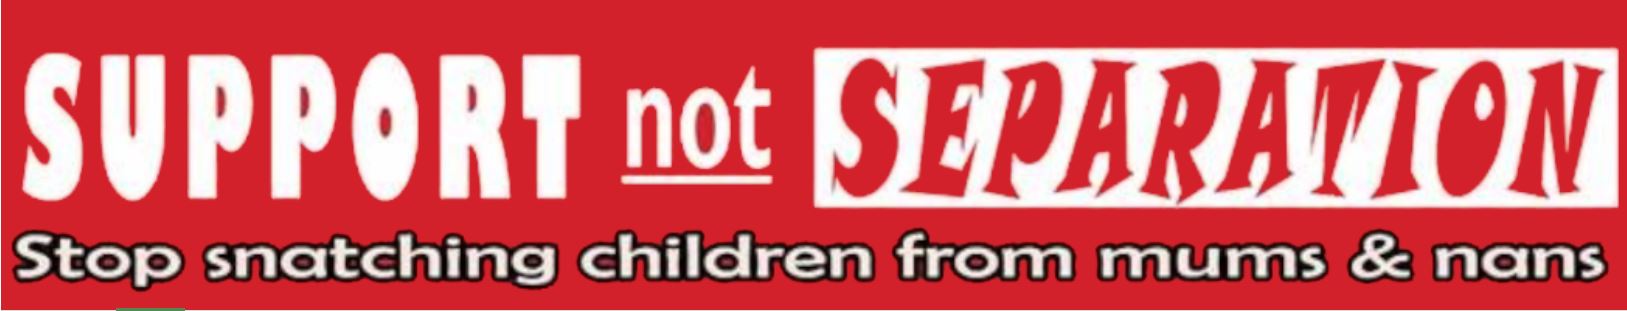 Banner: Support Not Separation.  Stop snatching children from mums & nans.  White and red letters on red background.